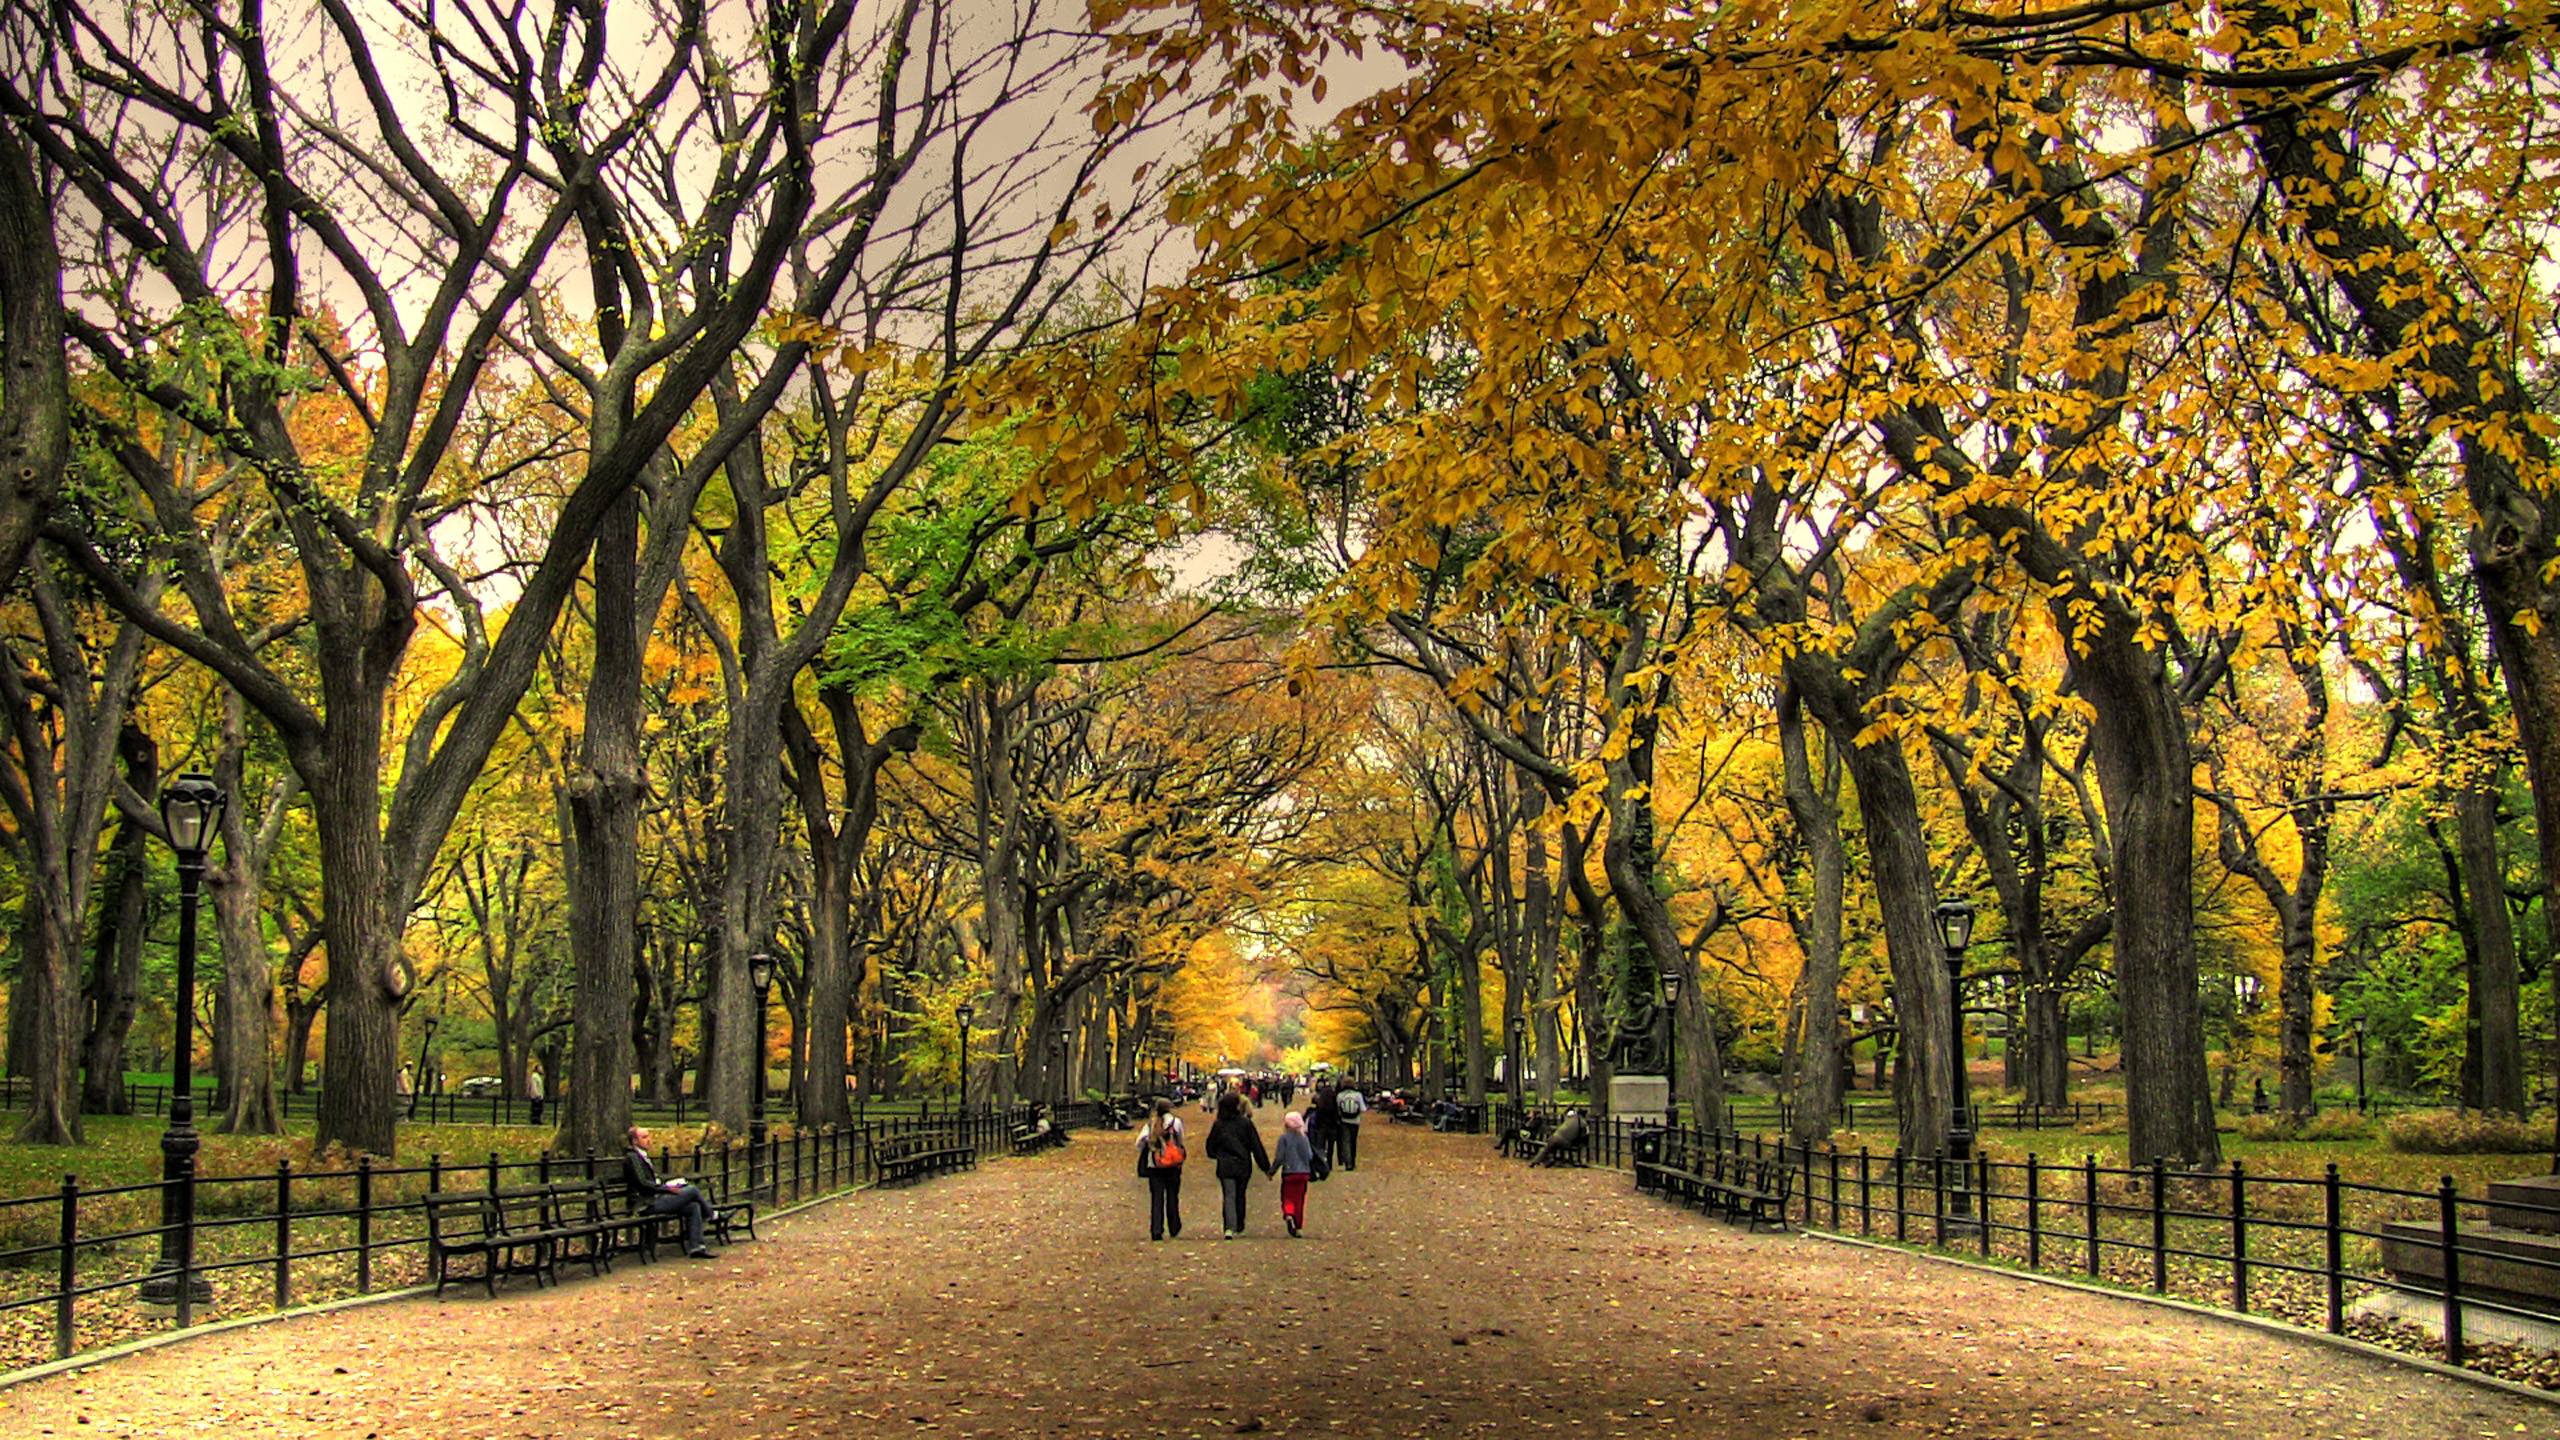 Central Park HD Wallpaper. Central Park New York Picture. Cool